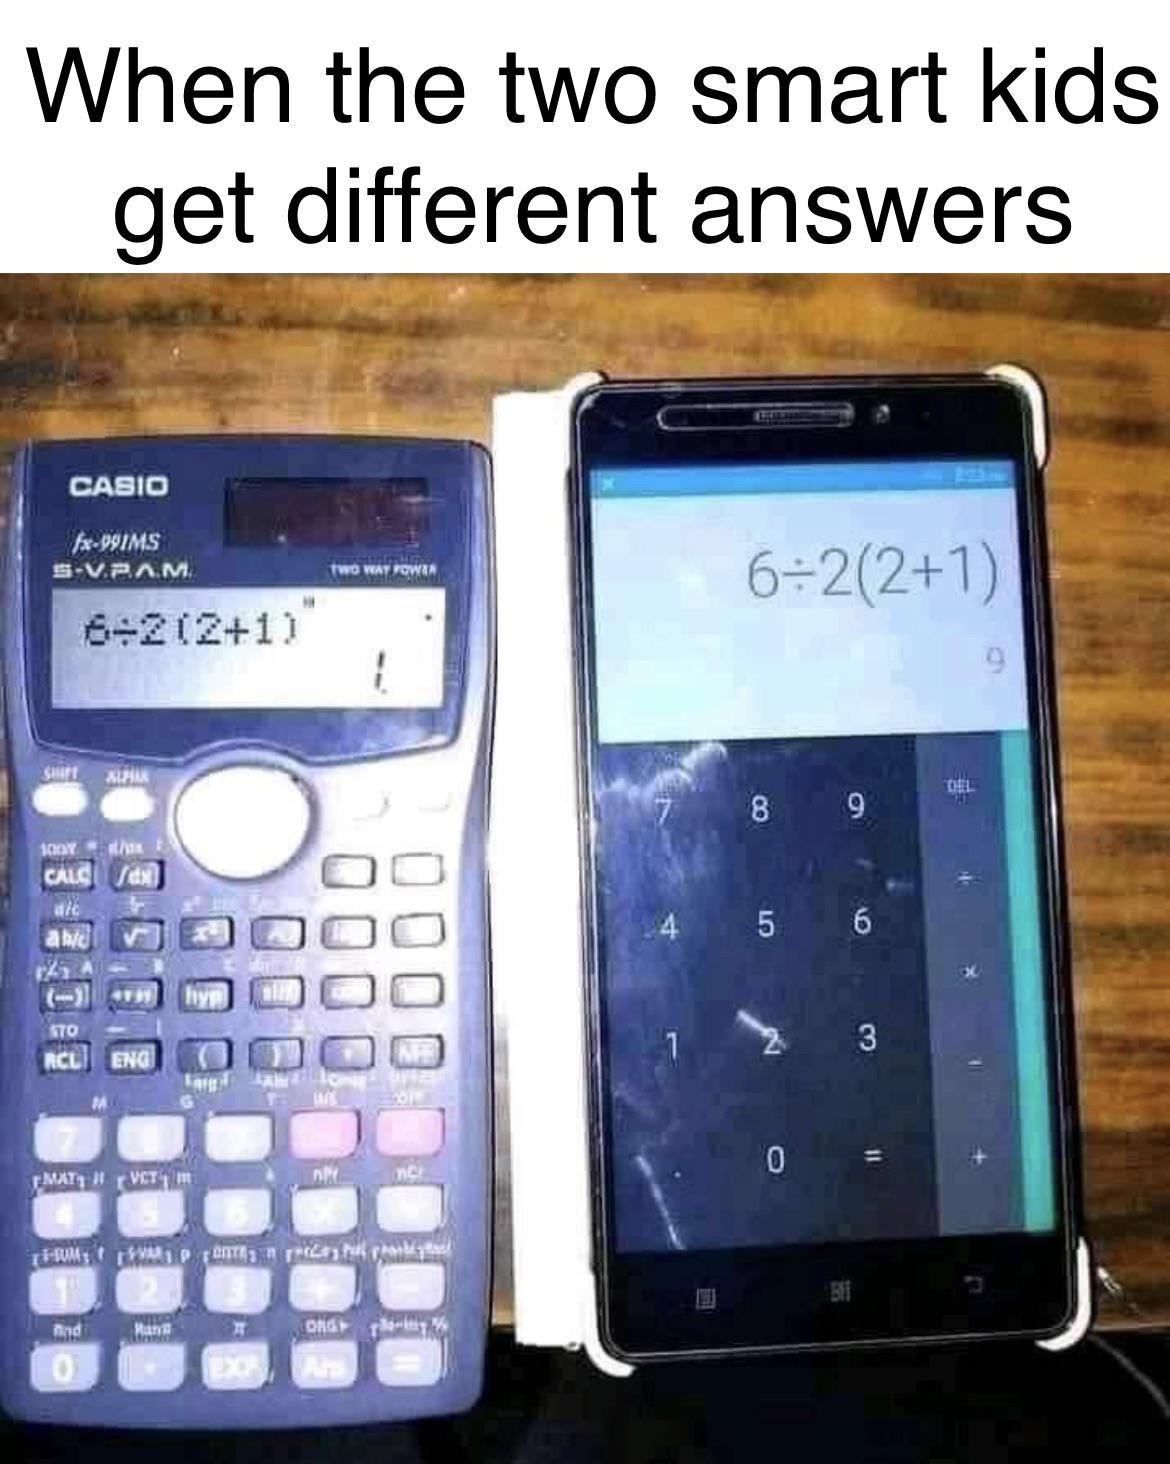 dank memes - blue air - When the two smart kids get different answers Casio fx99IMS SV.Pam Two Way Powia 6221 62121 1 Sh Hau Oll 8 9 100 Cals ald be 4 5 6 Sto Rcl 2 3 Eng Ma 0 Math Vct 1m Am inc Thrum Wip porta in respond B11 And Han Ons Exie 0